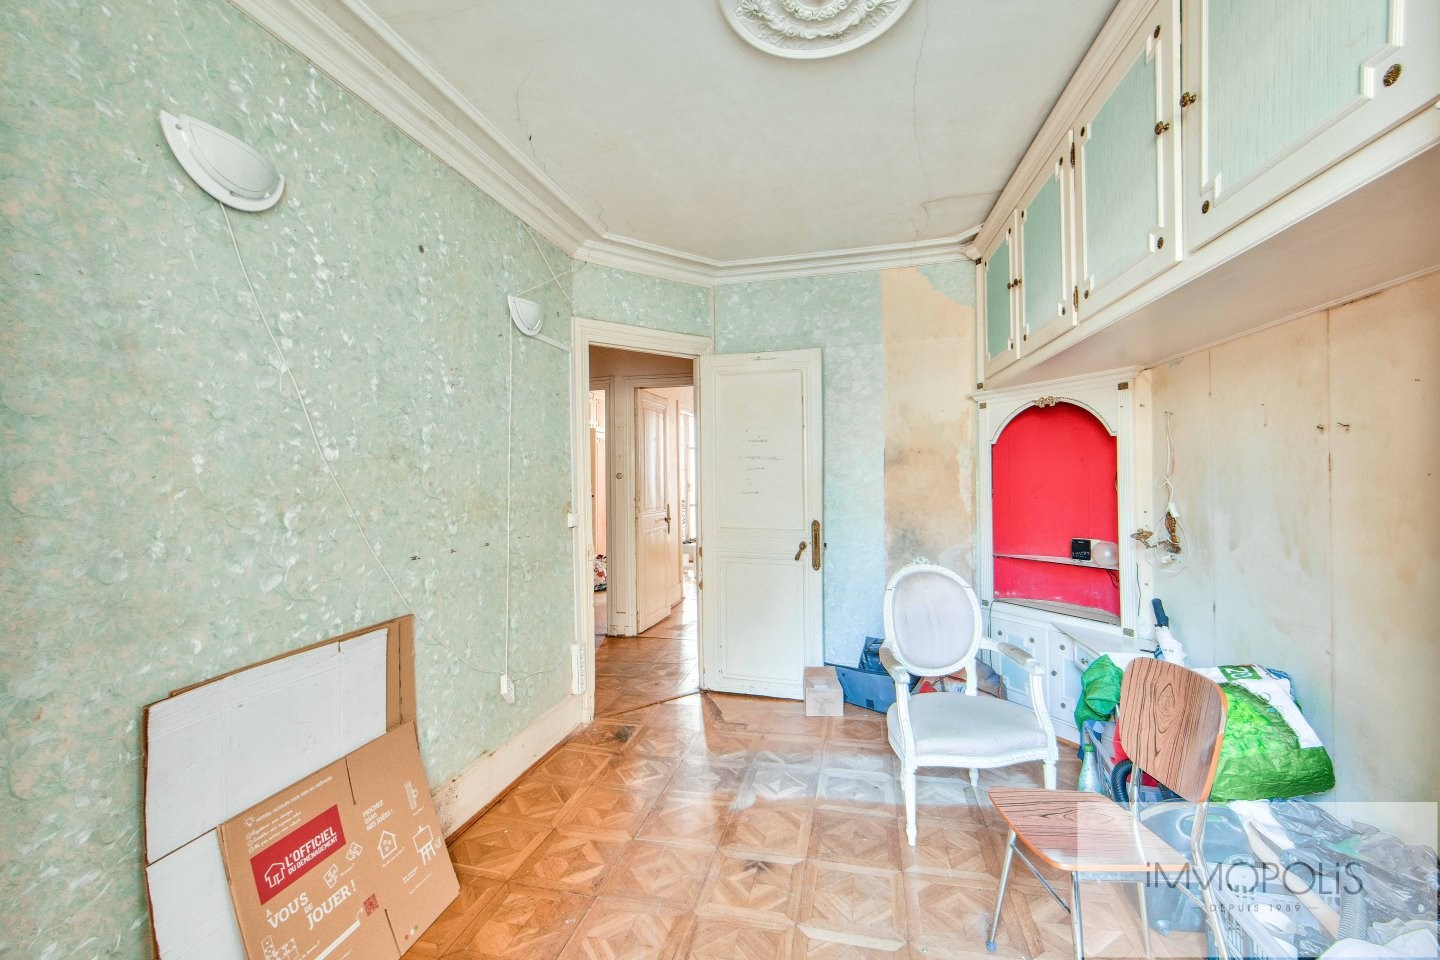 Apartment to be renovated in the heart of the abbesses. 10